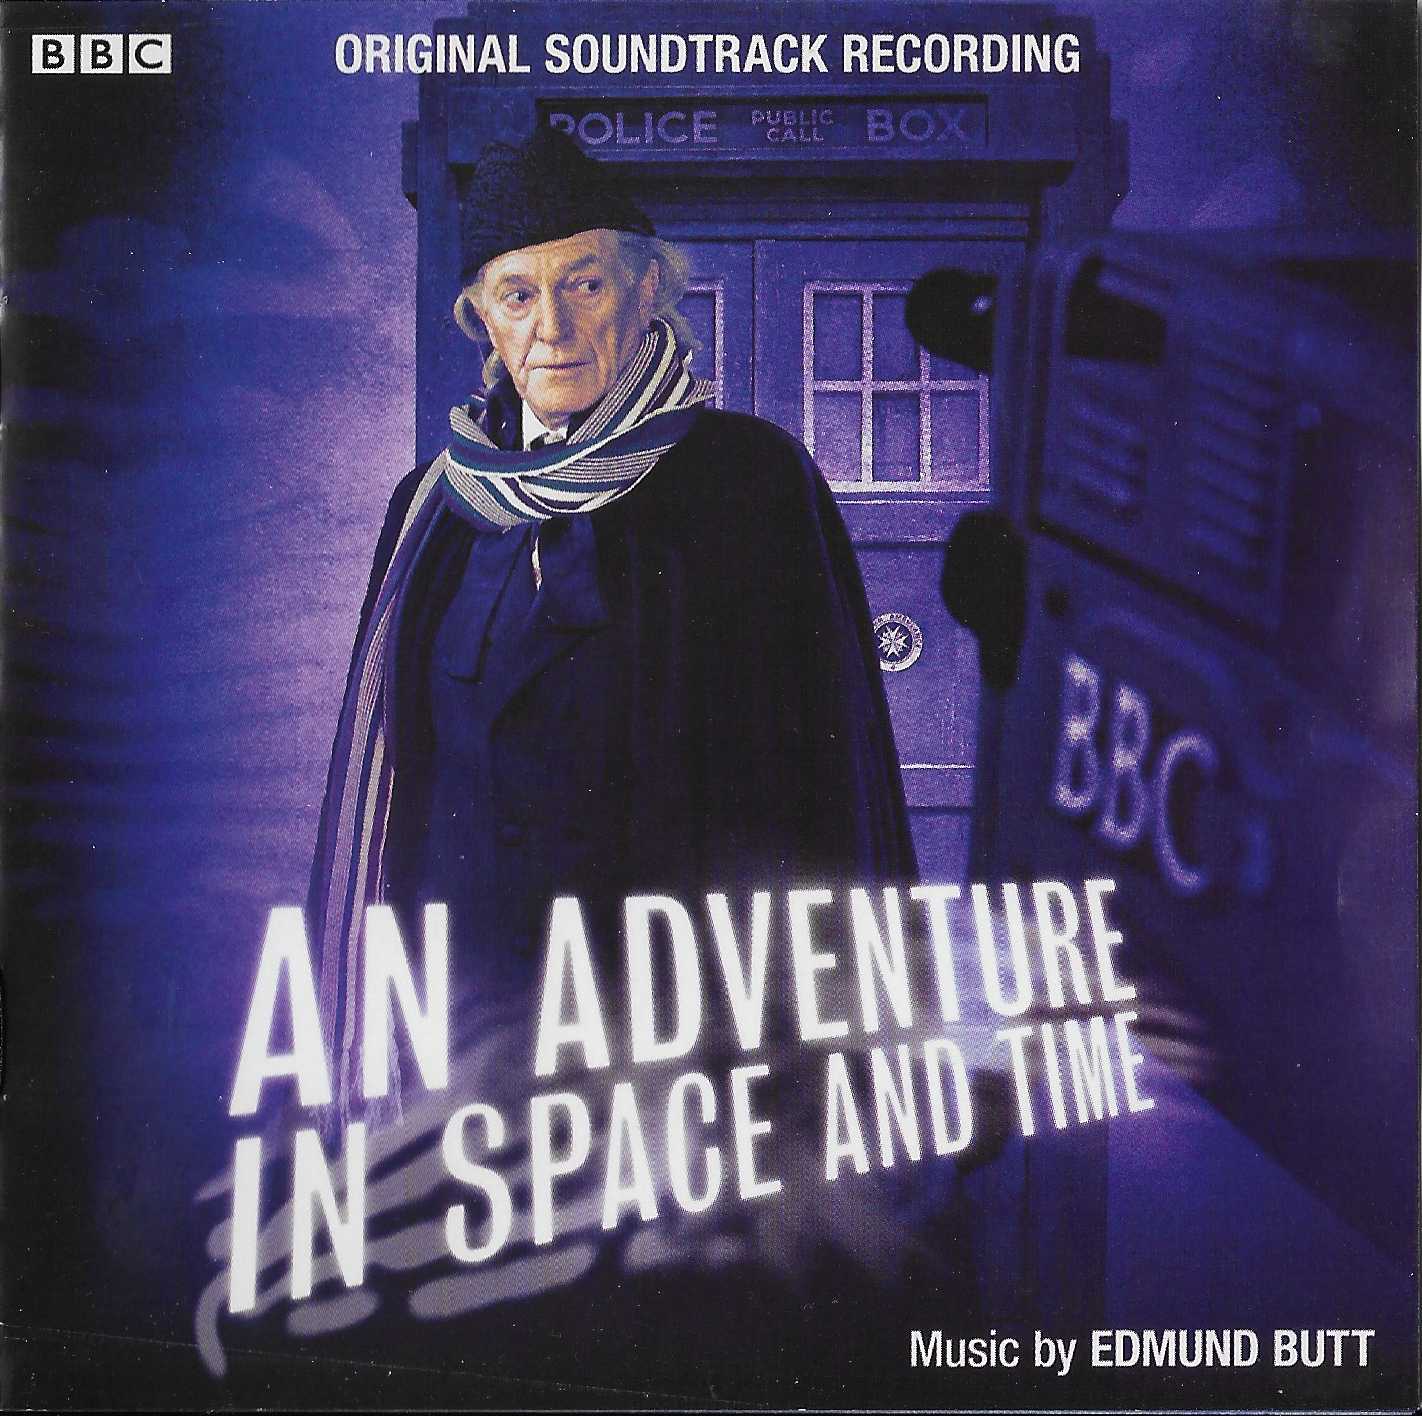 Picture of SILCD 1442 Doctor Who - An adventure in space and time by artist Edmund Butt from the BBC records and Tapes library